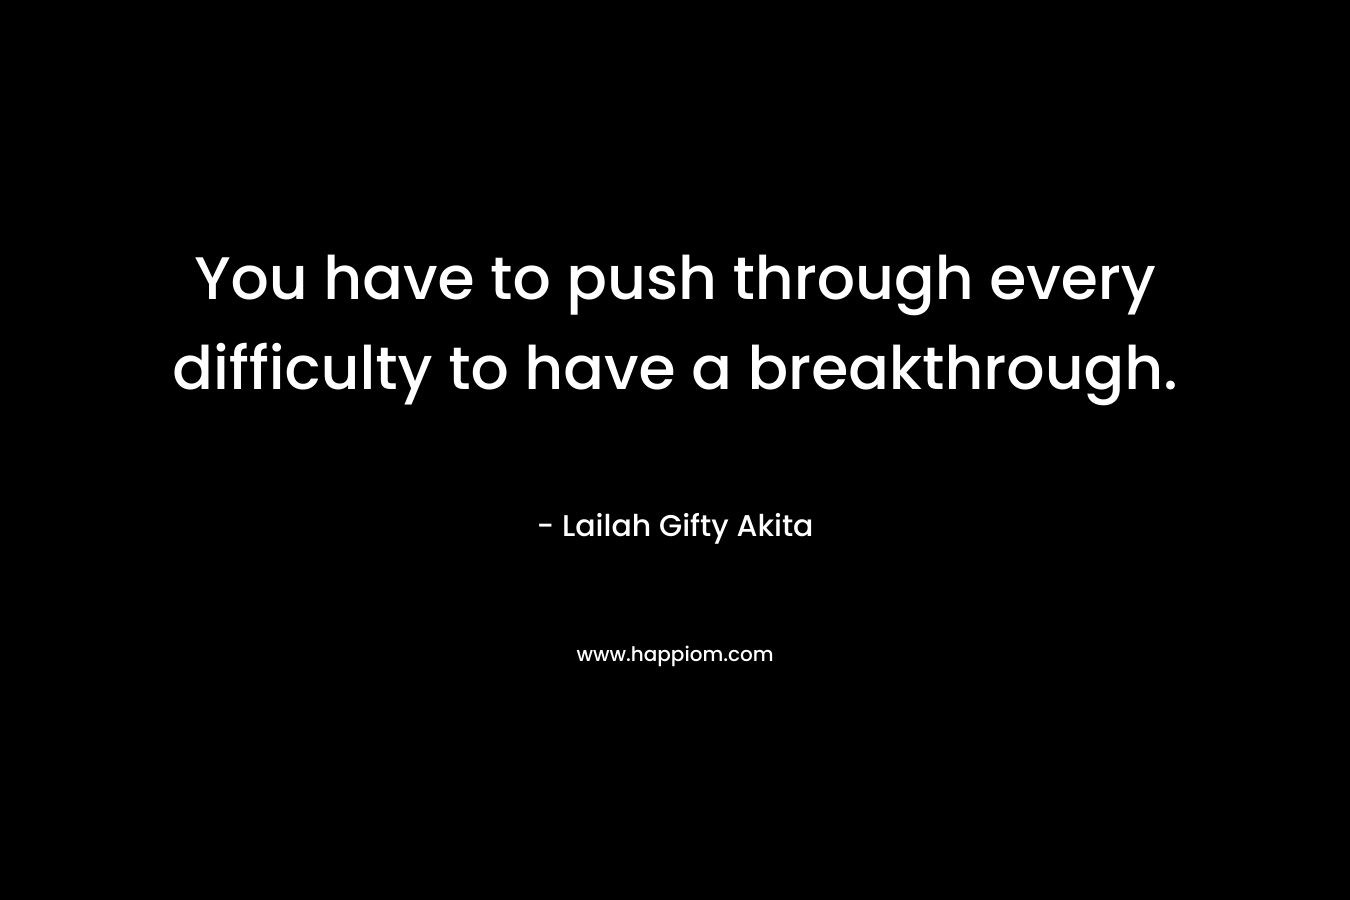 You have to push through every difficulty to have a breakthrough. – Lailah Gifty Akita